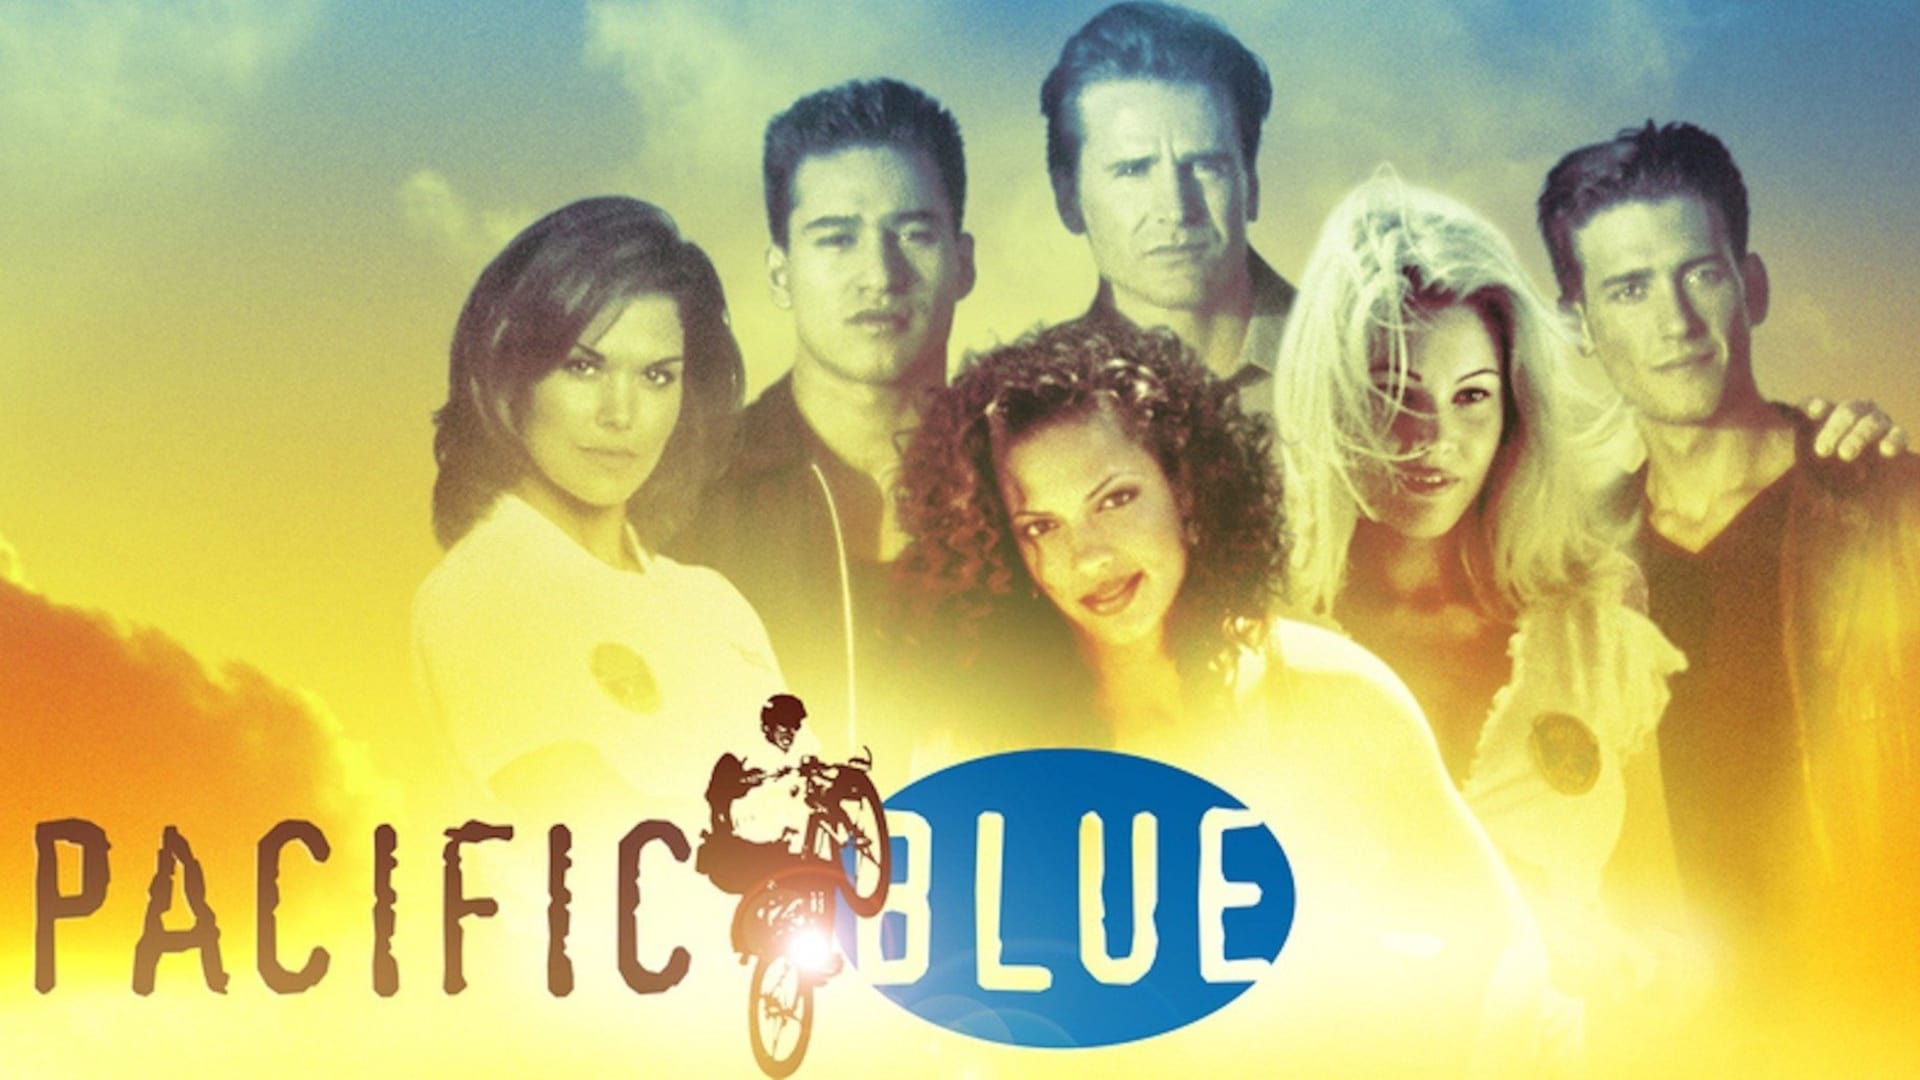 Watch Pacific Blue Online